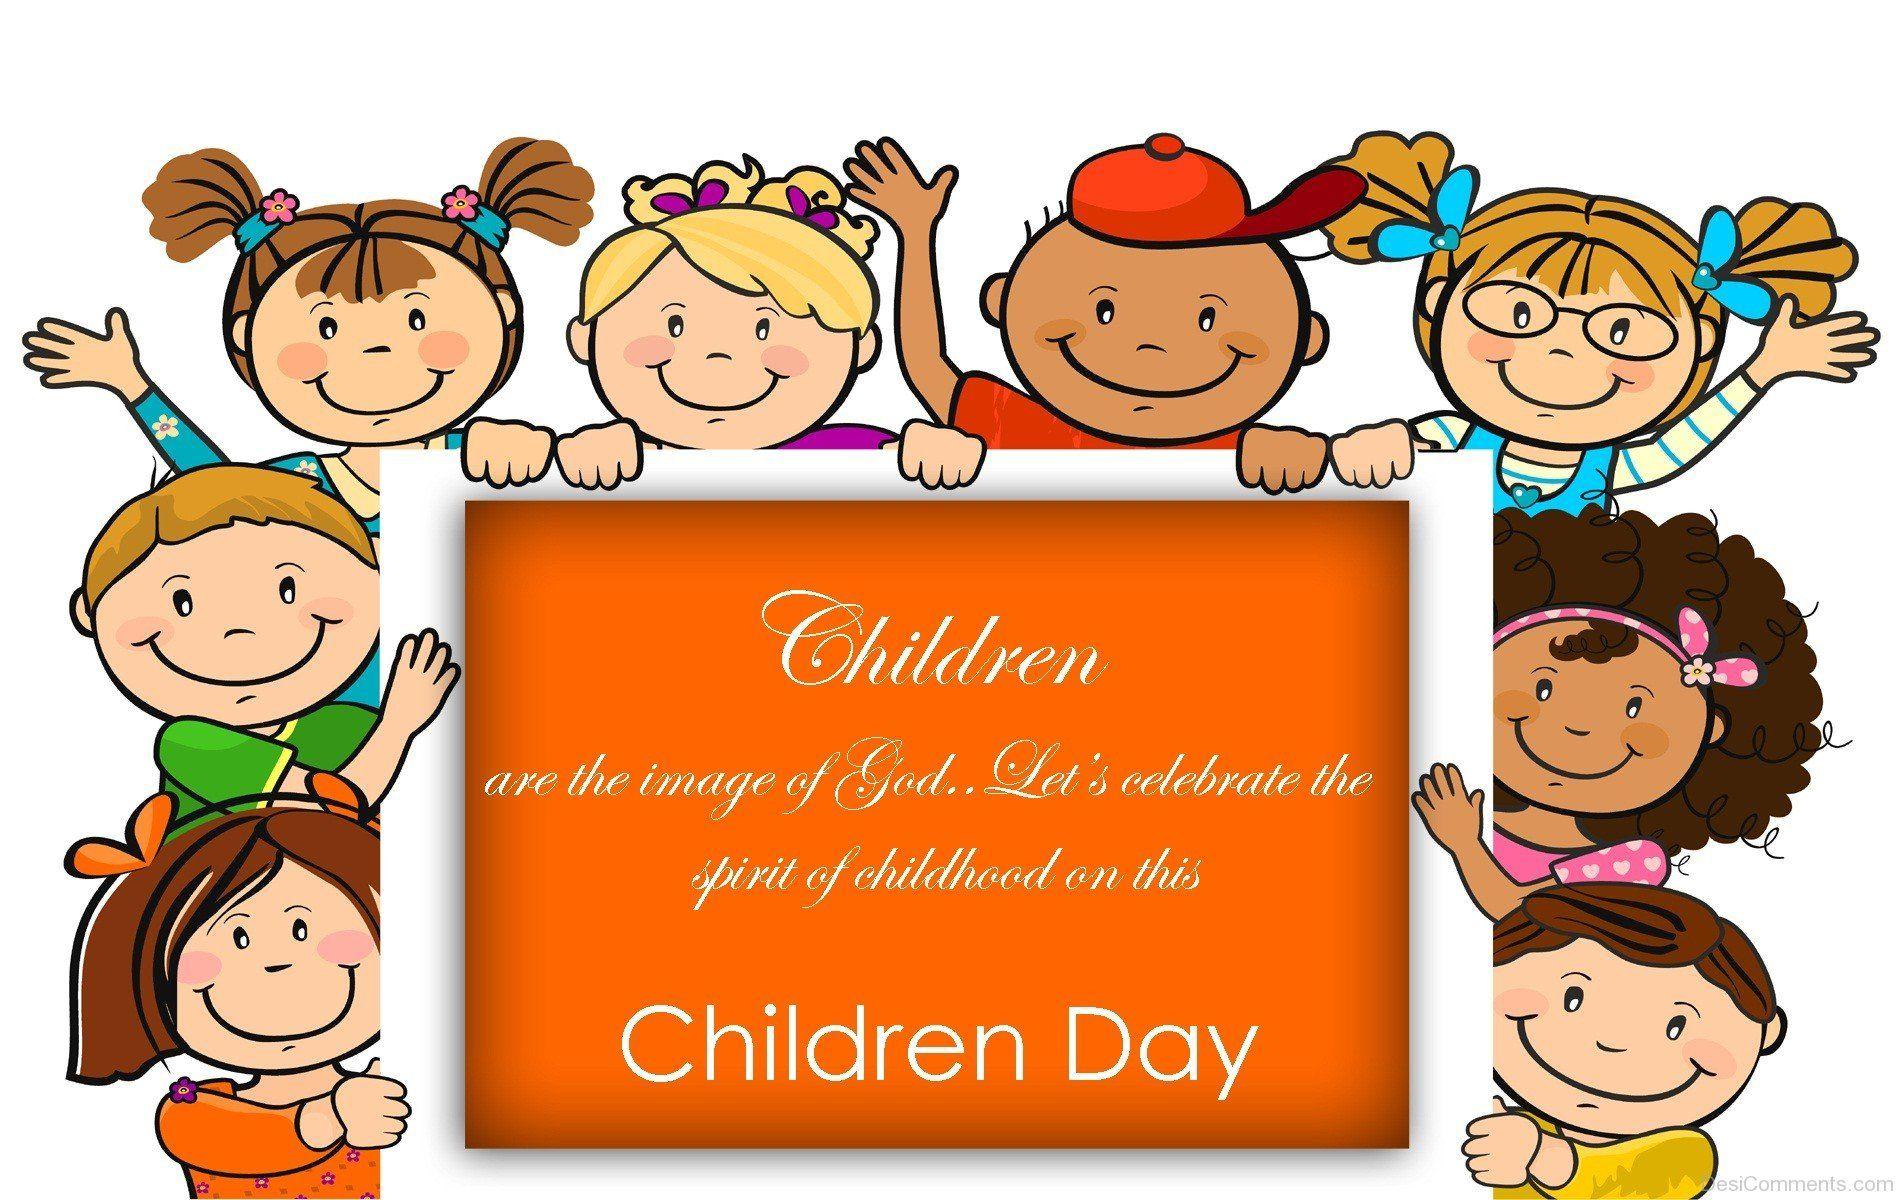 Children's Day Picture, Image, Graphics